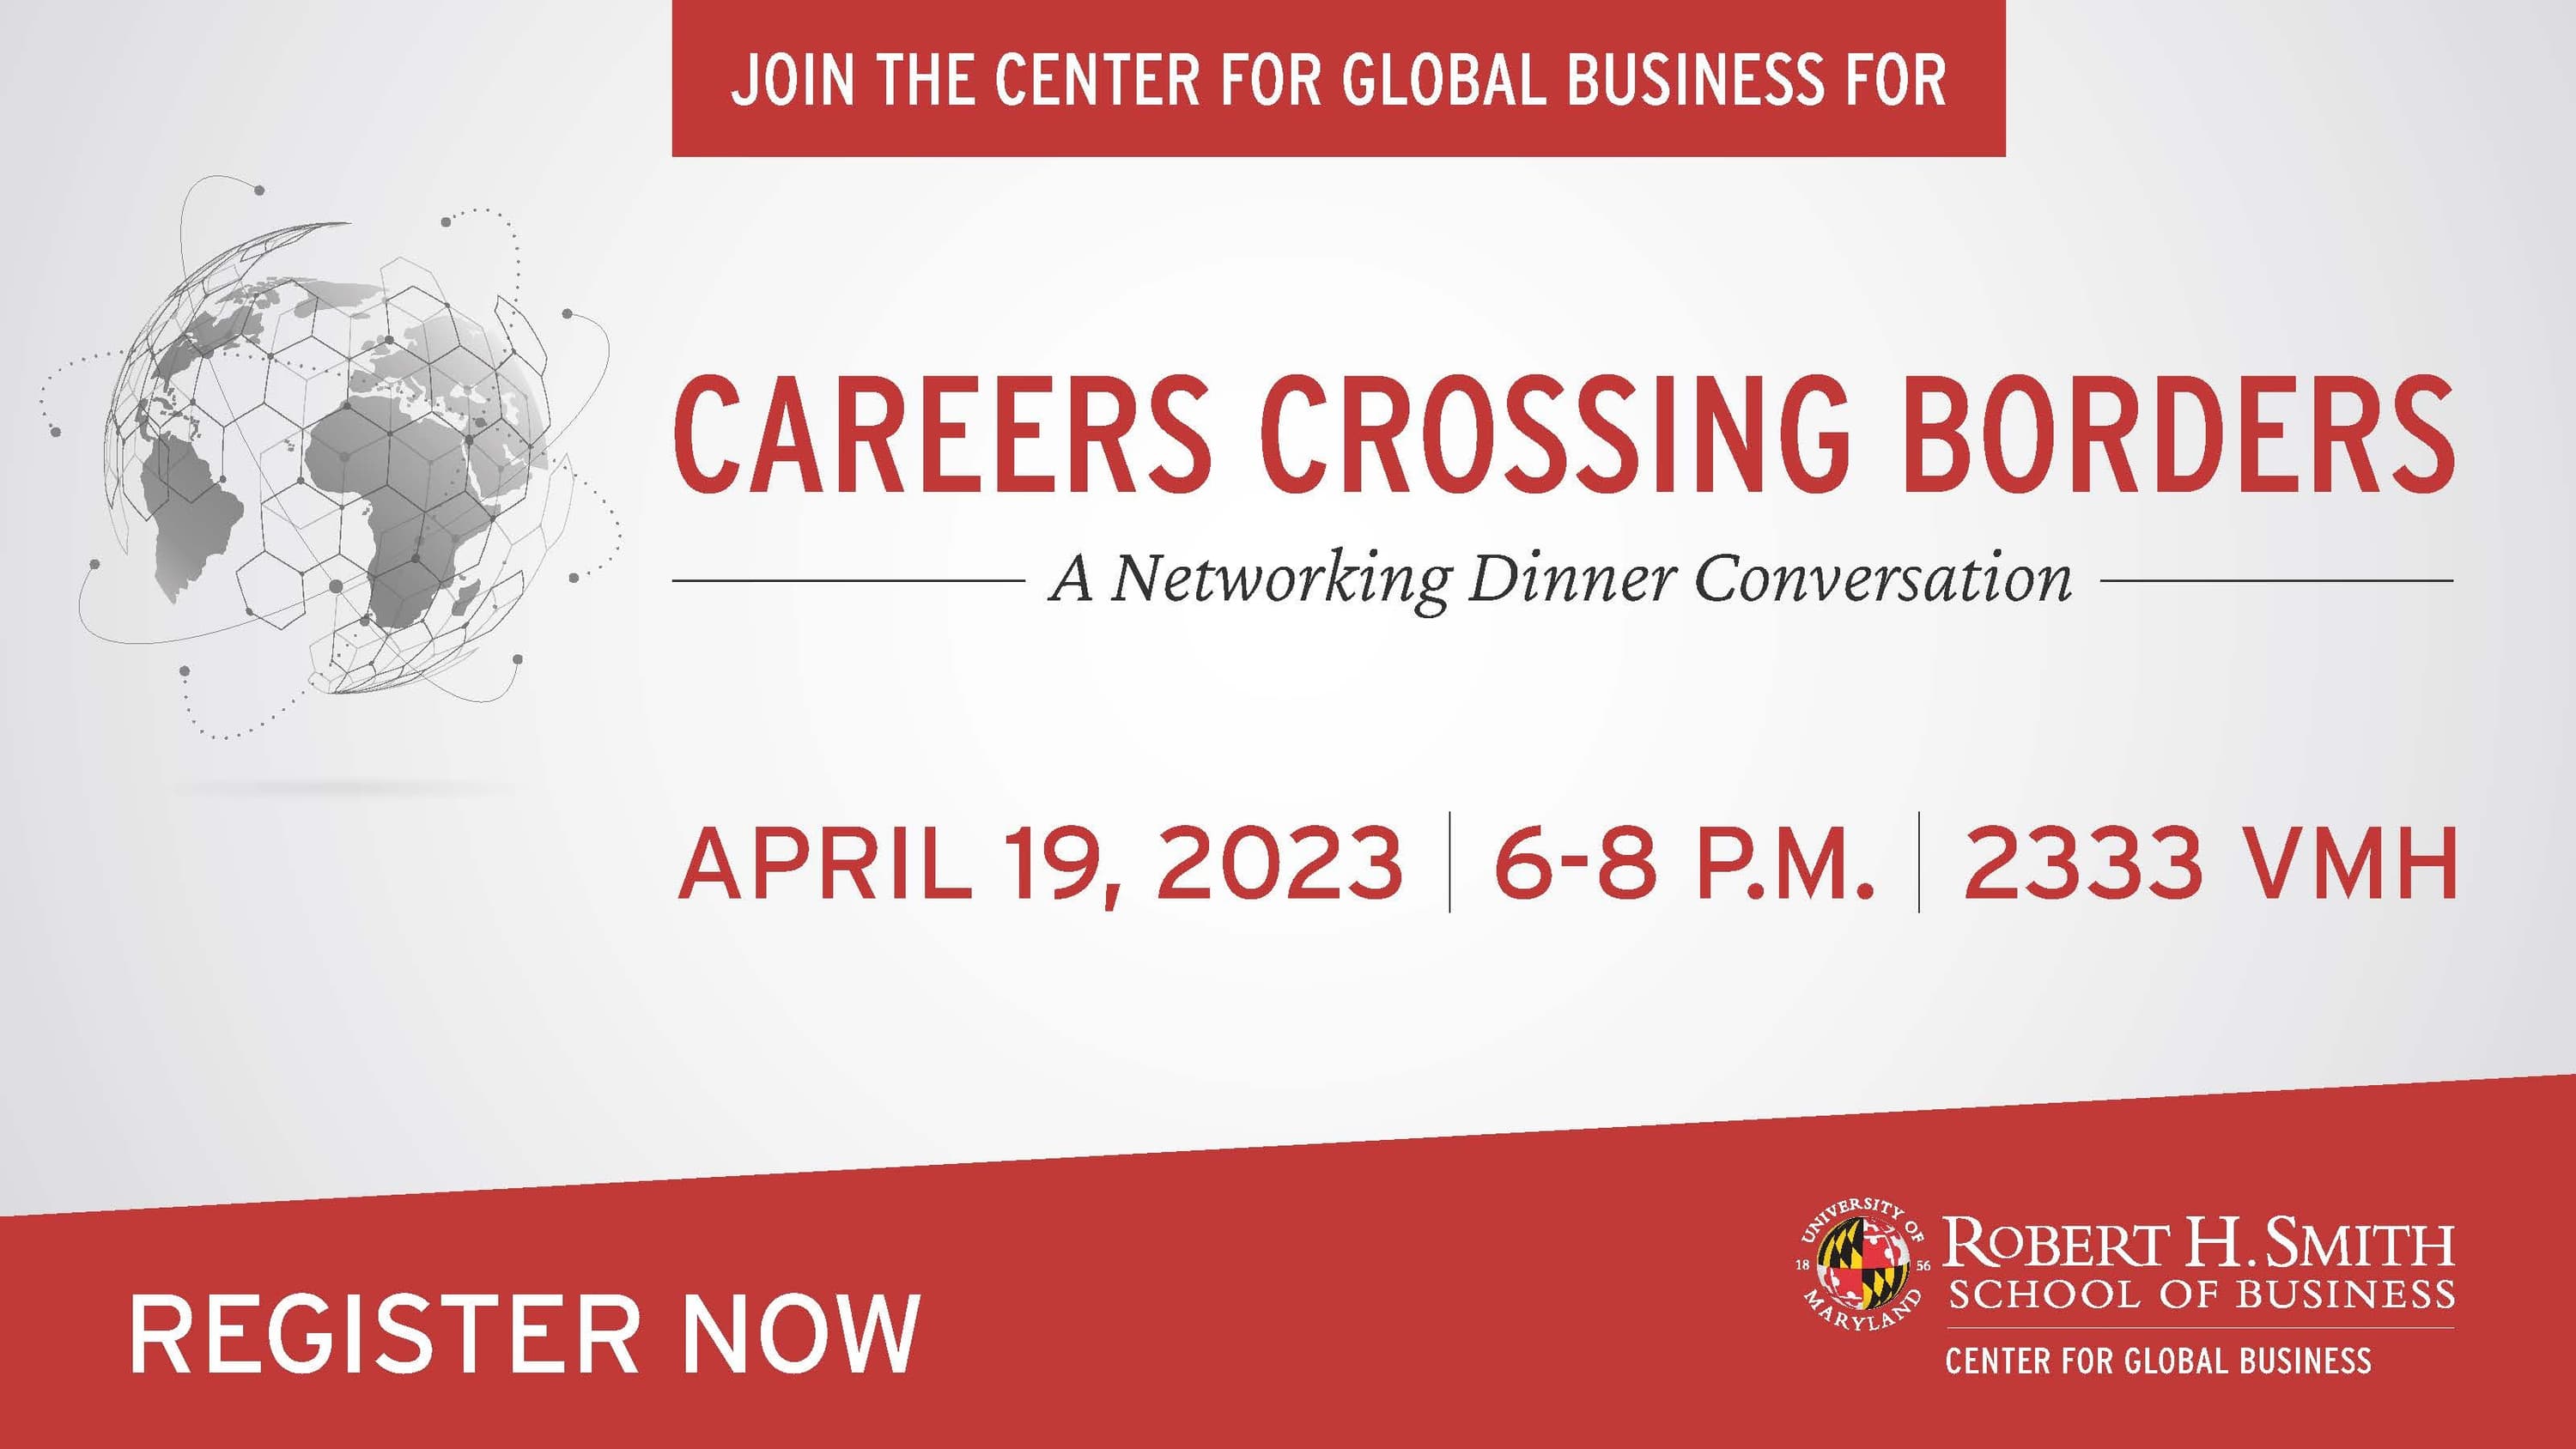 Careers Crossing Borders: A Networking Dinner Conversation